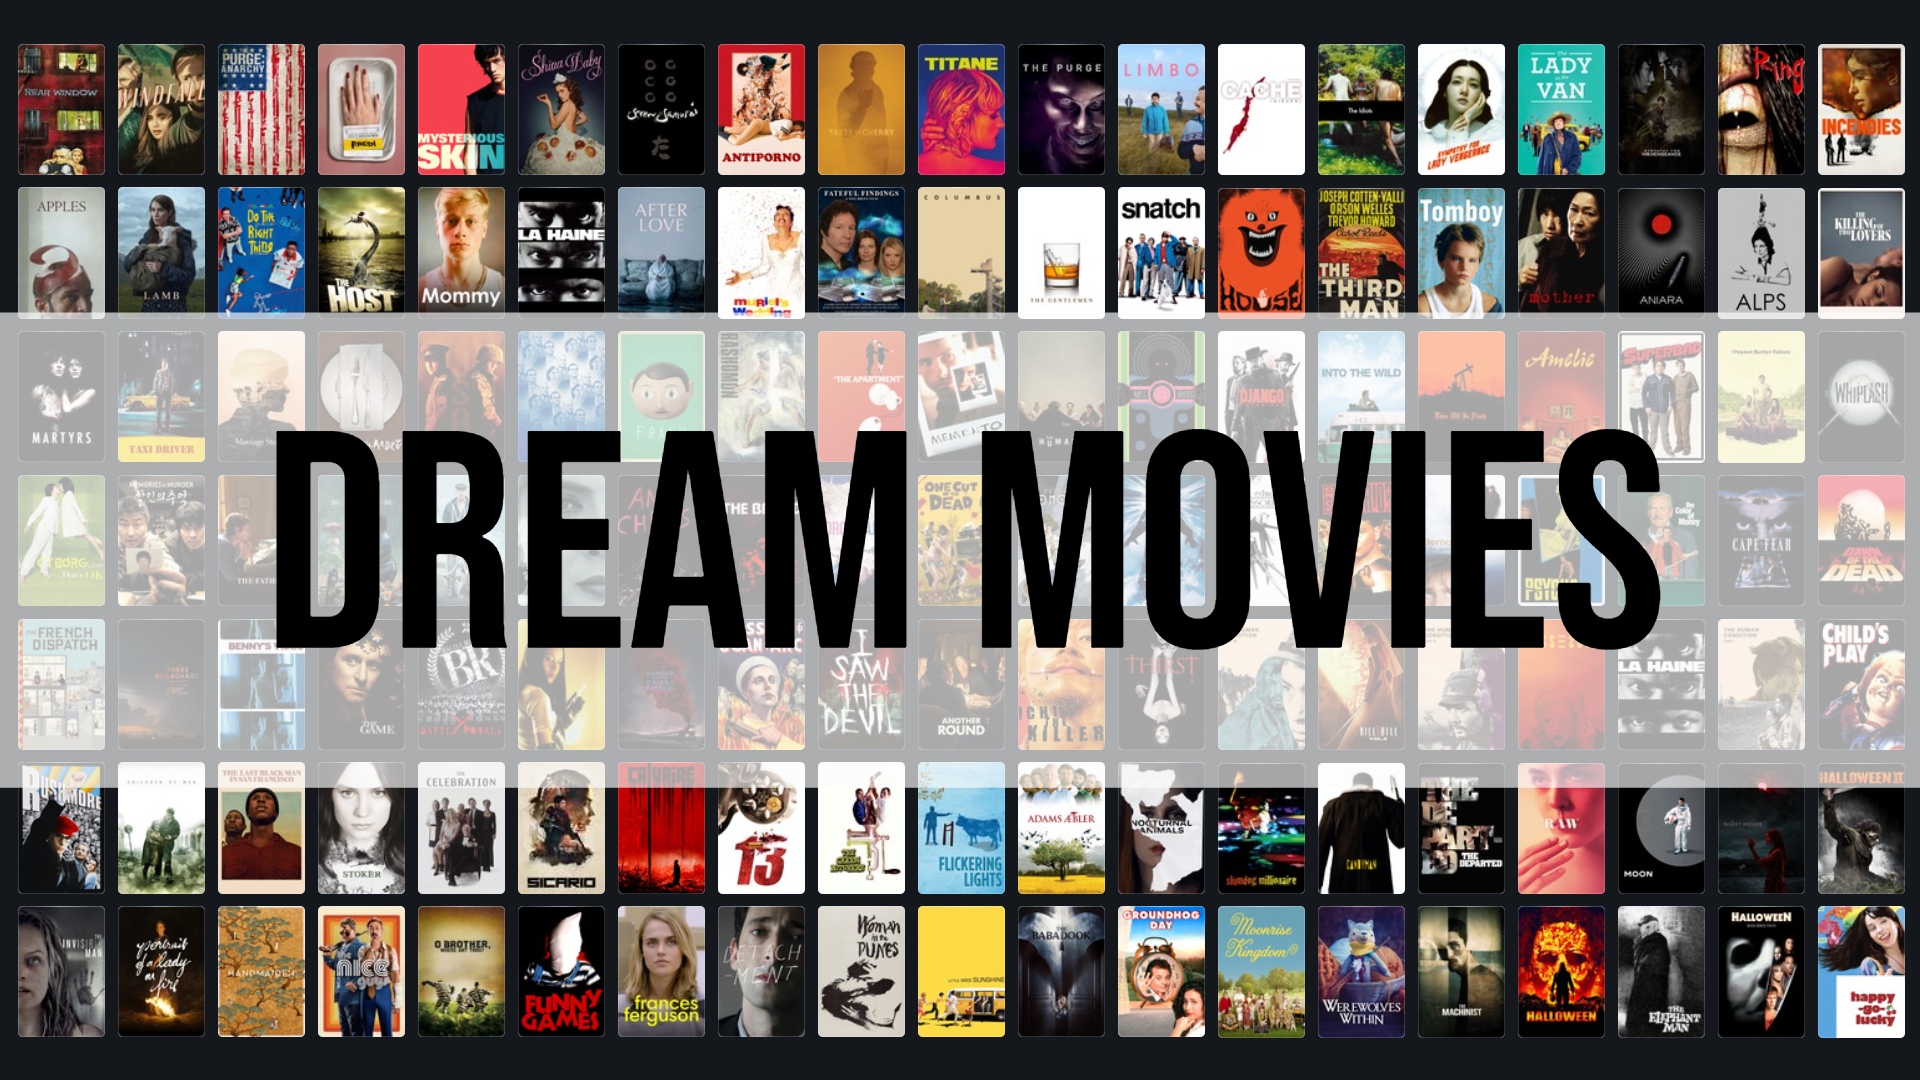 Dream Movies - Enjoy A Wide Range Of Movies And TV Shows Without Paying A Dime